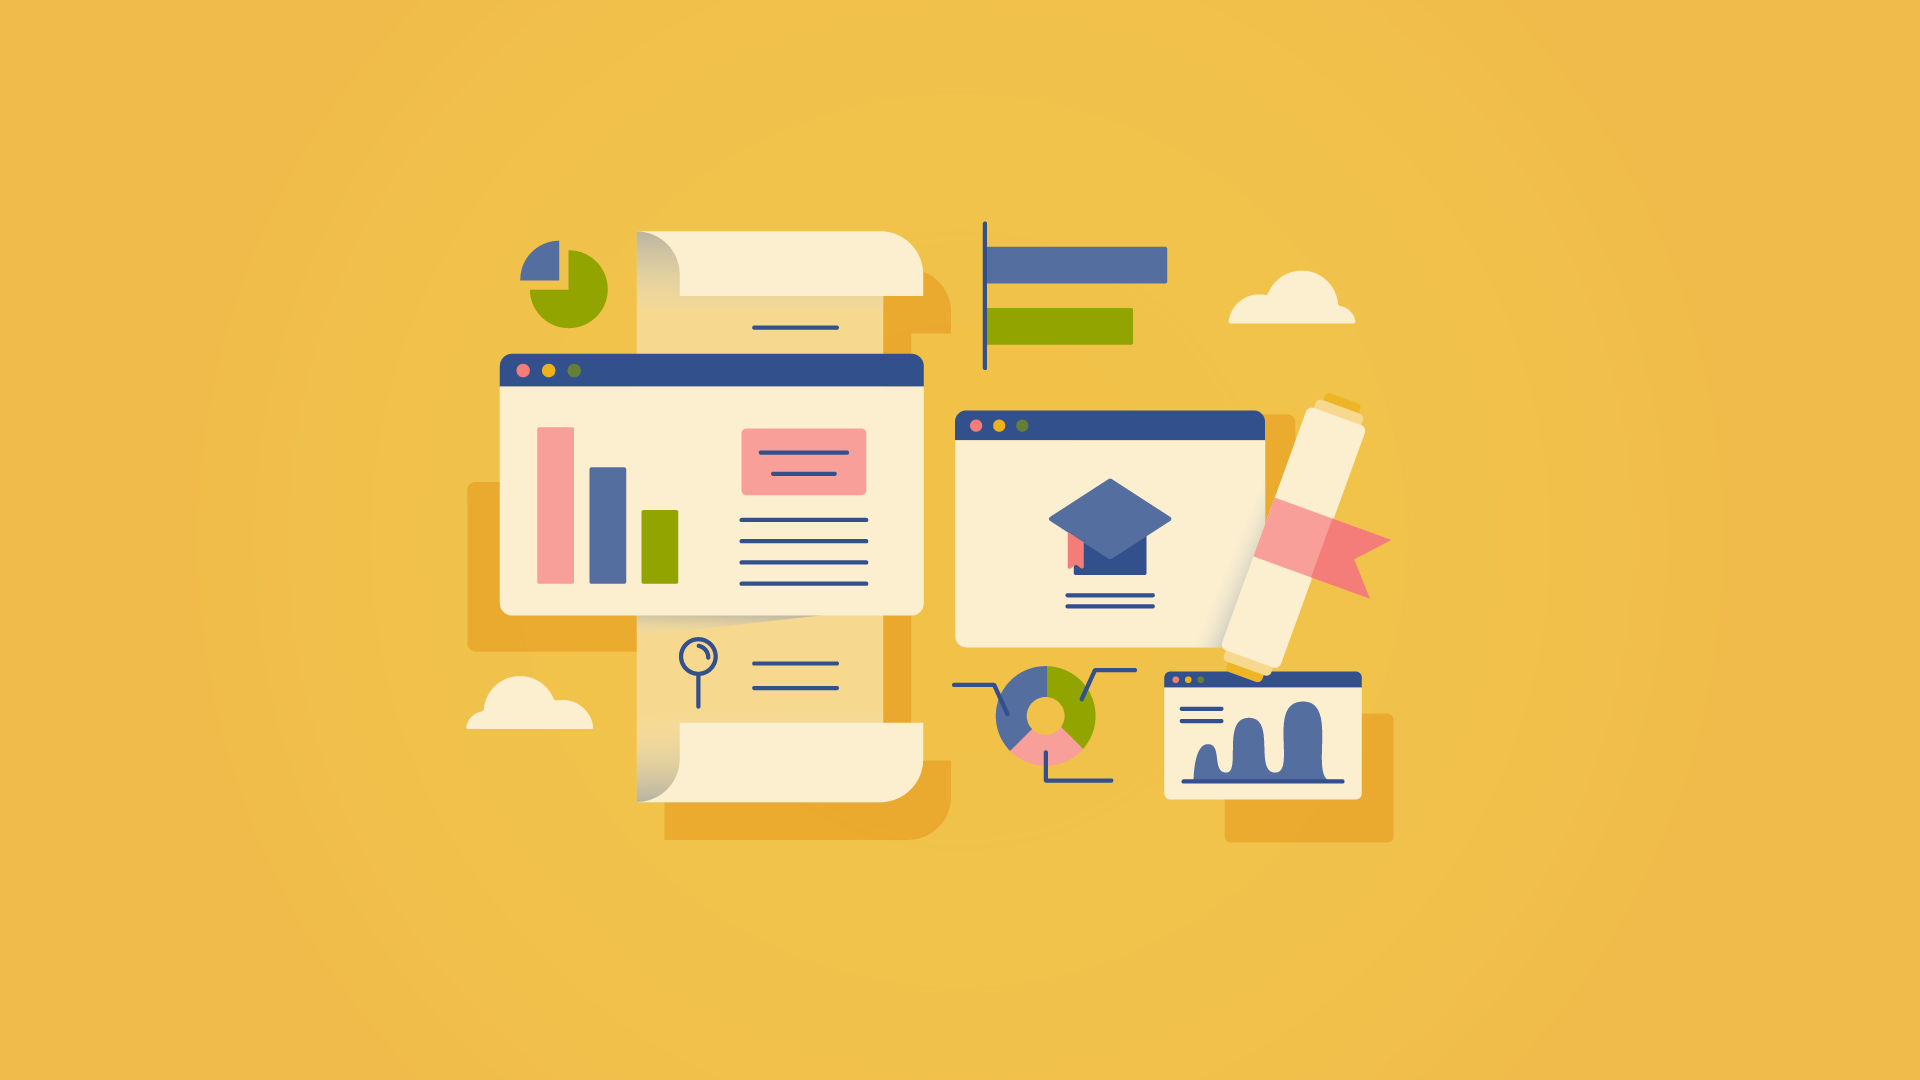 Illustrations of diplomas, charts and browser windows on a yellow background.